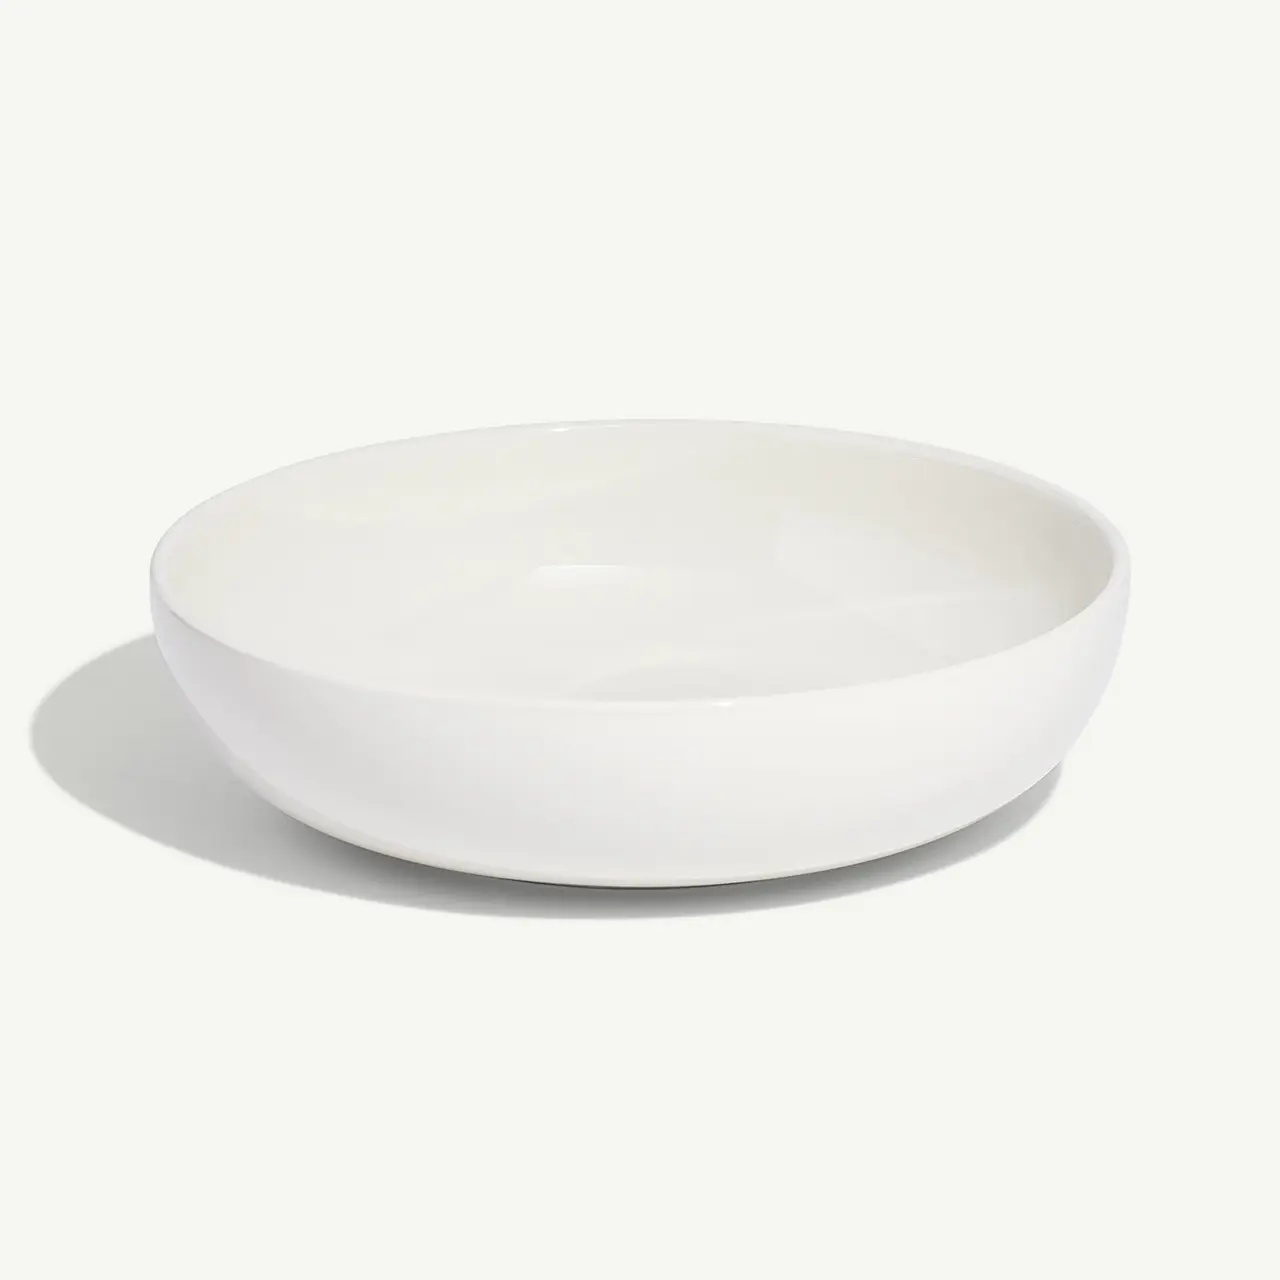 A plain white, round, ceramic bowl is centered on a light background.